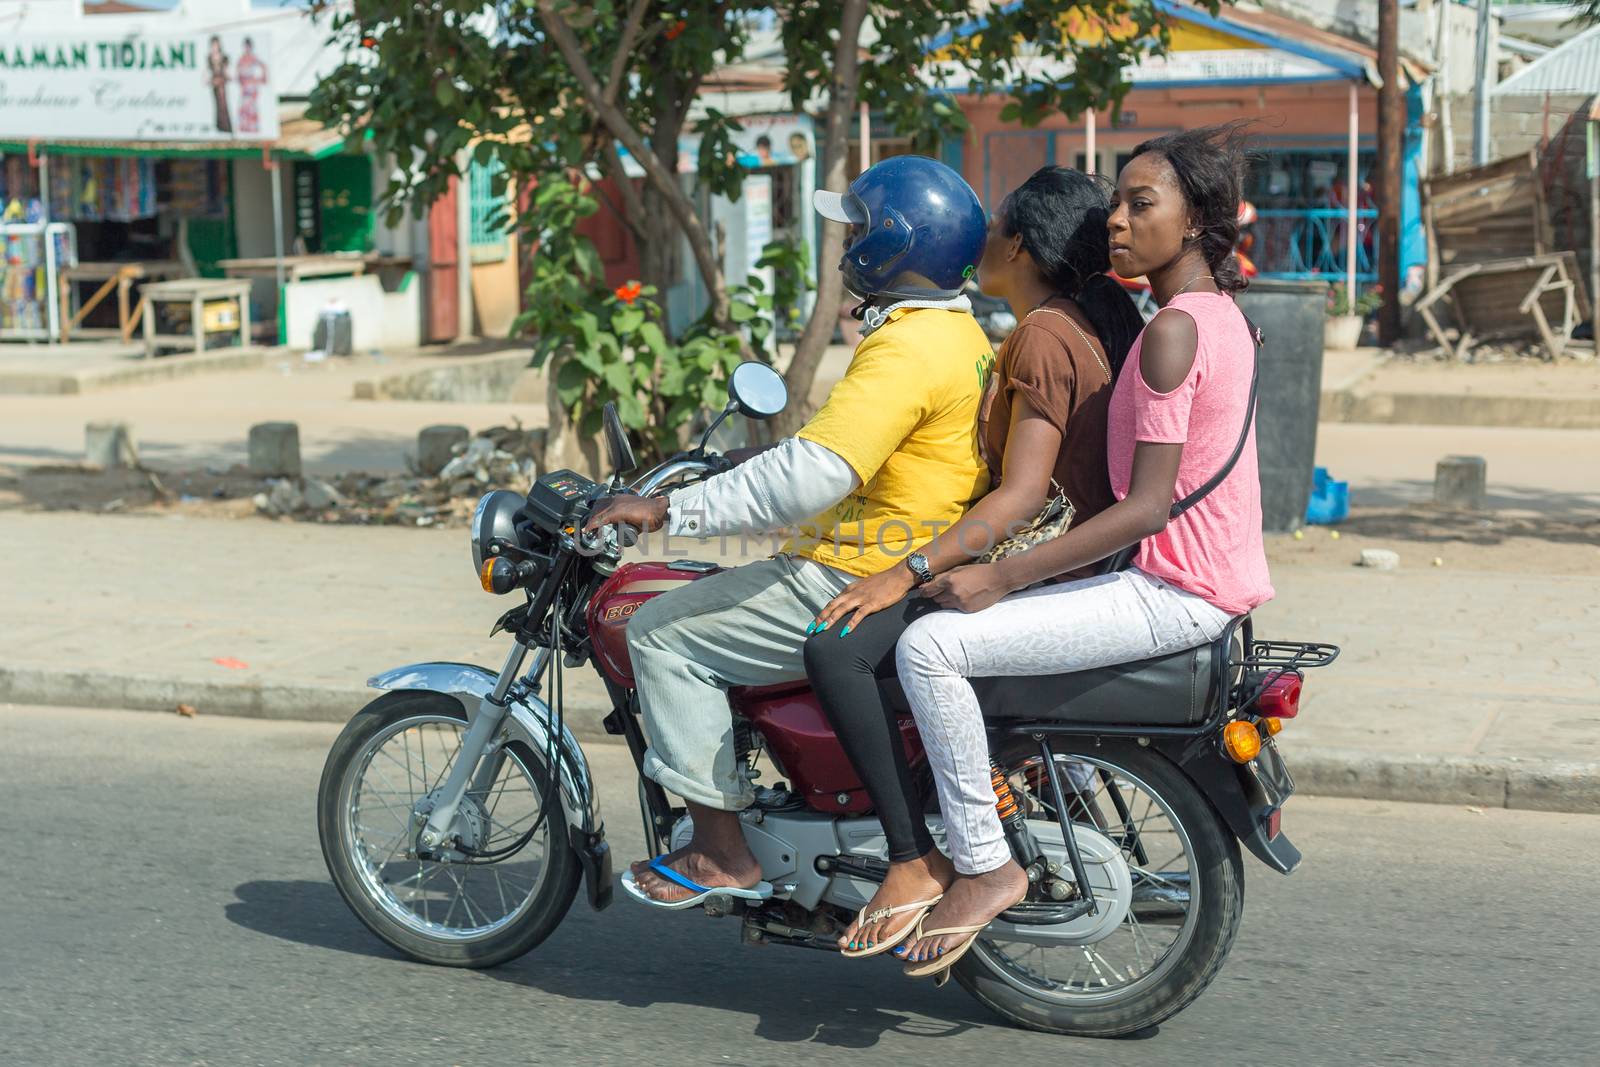 Cotonou, Benin: May 26: Two womnn ride a hired Motorcycle taxi, the most common means of hired transportation in the city, on May 26, 2015 in Cotonou, Benin.